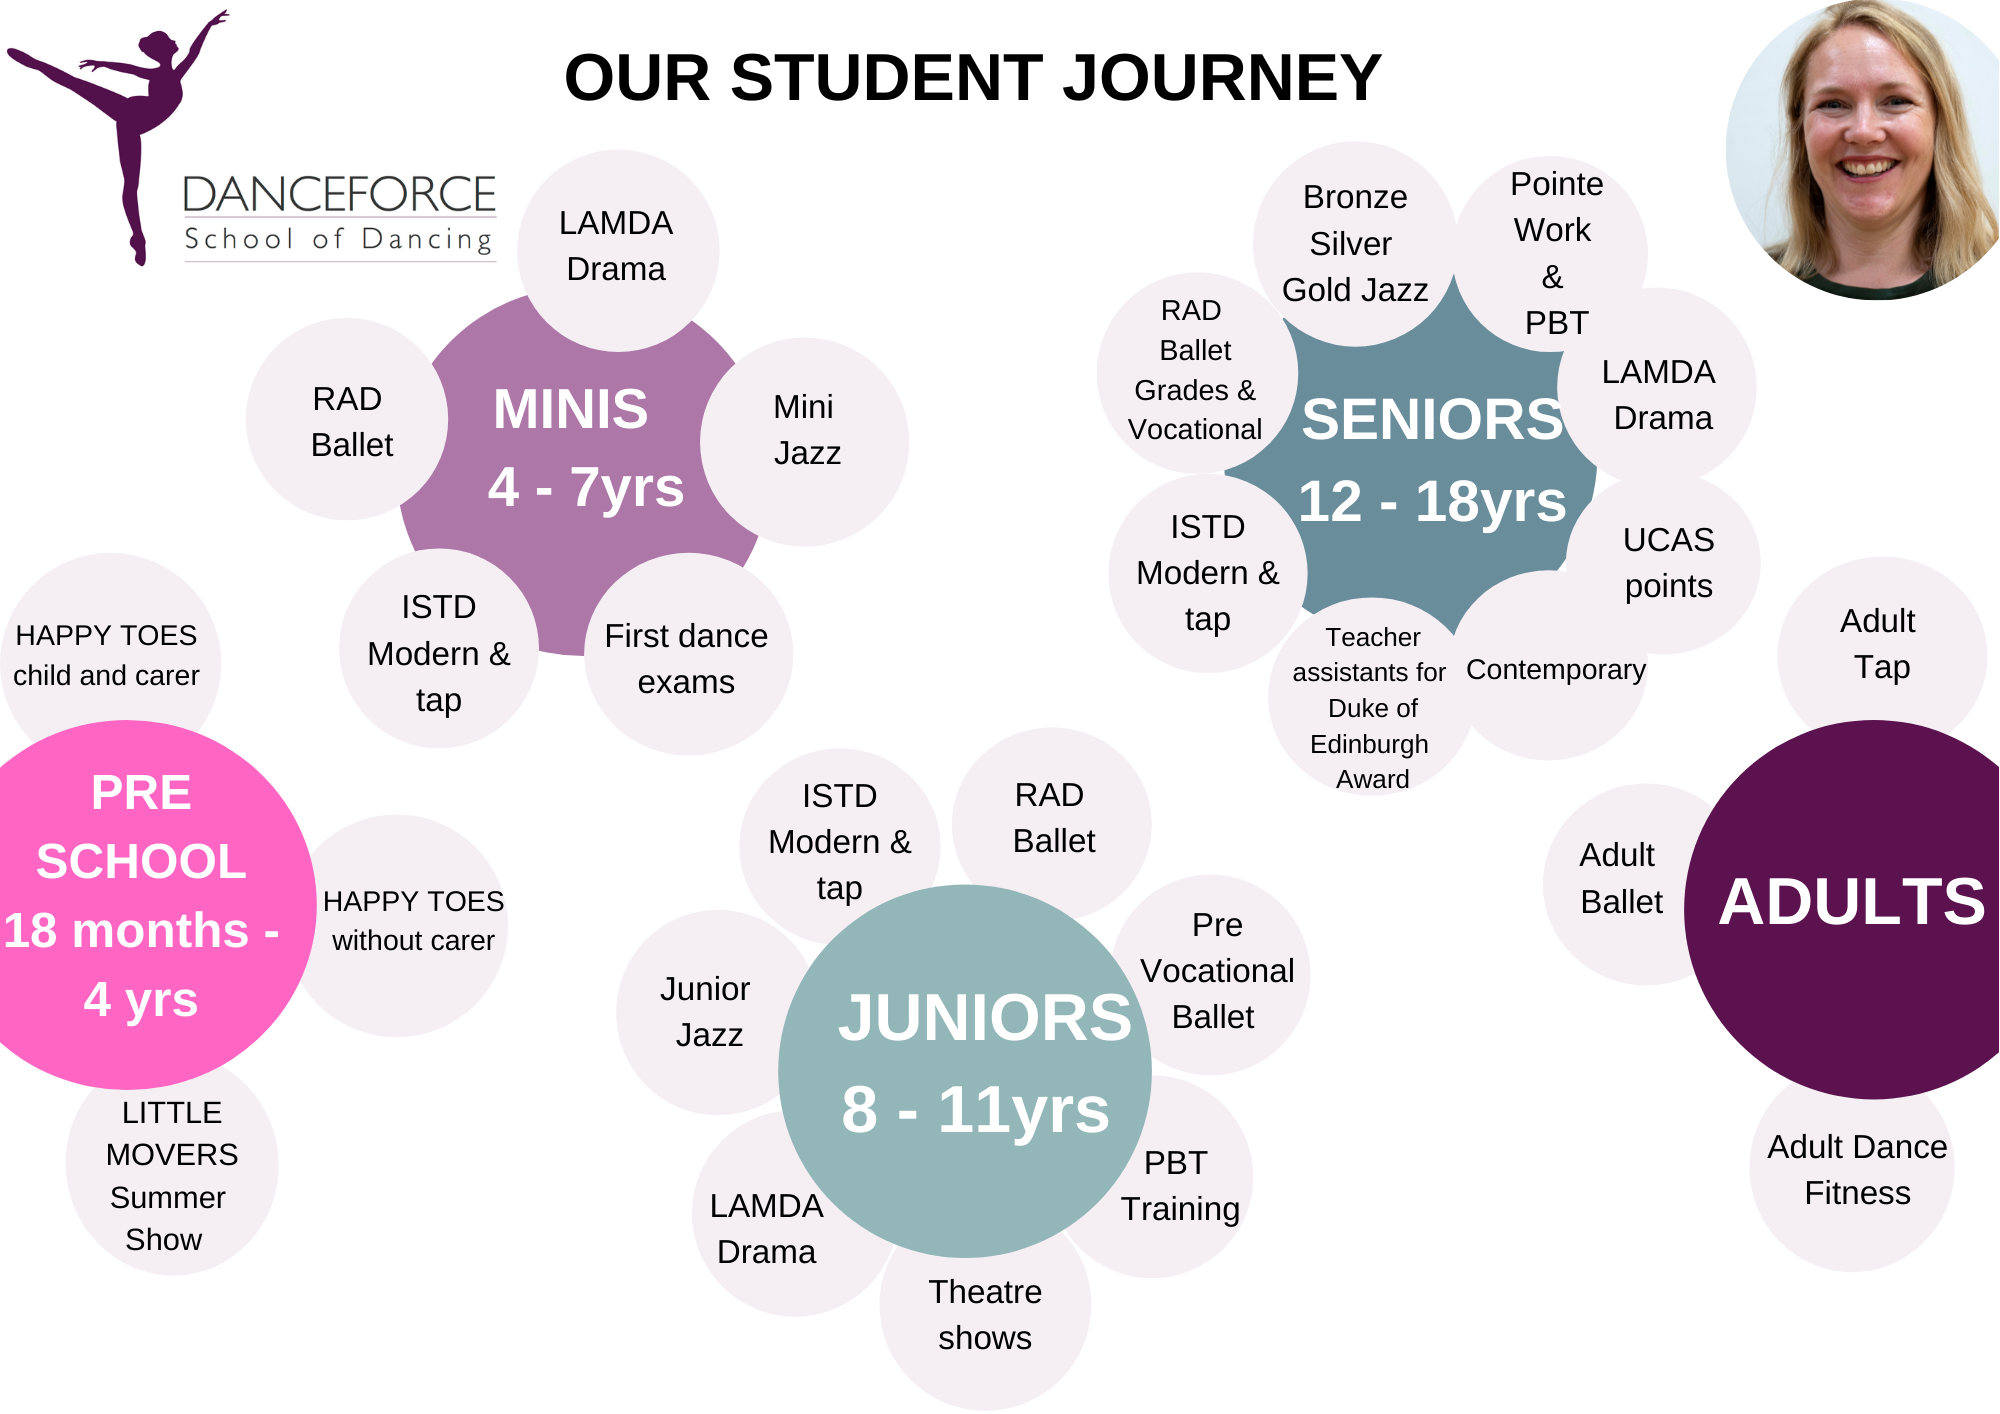 Our Student Journey